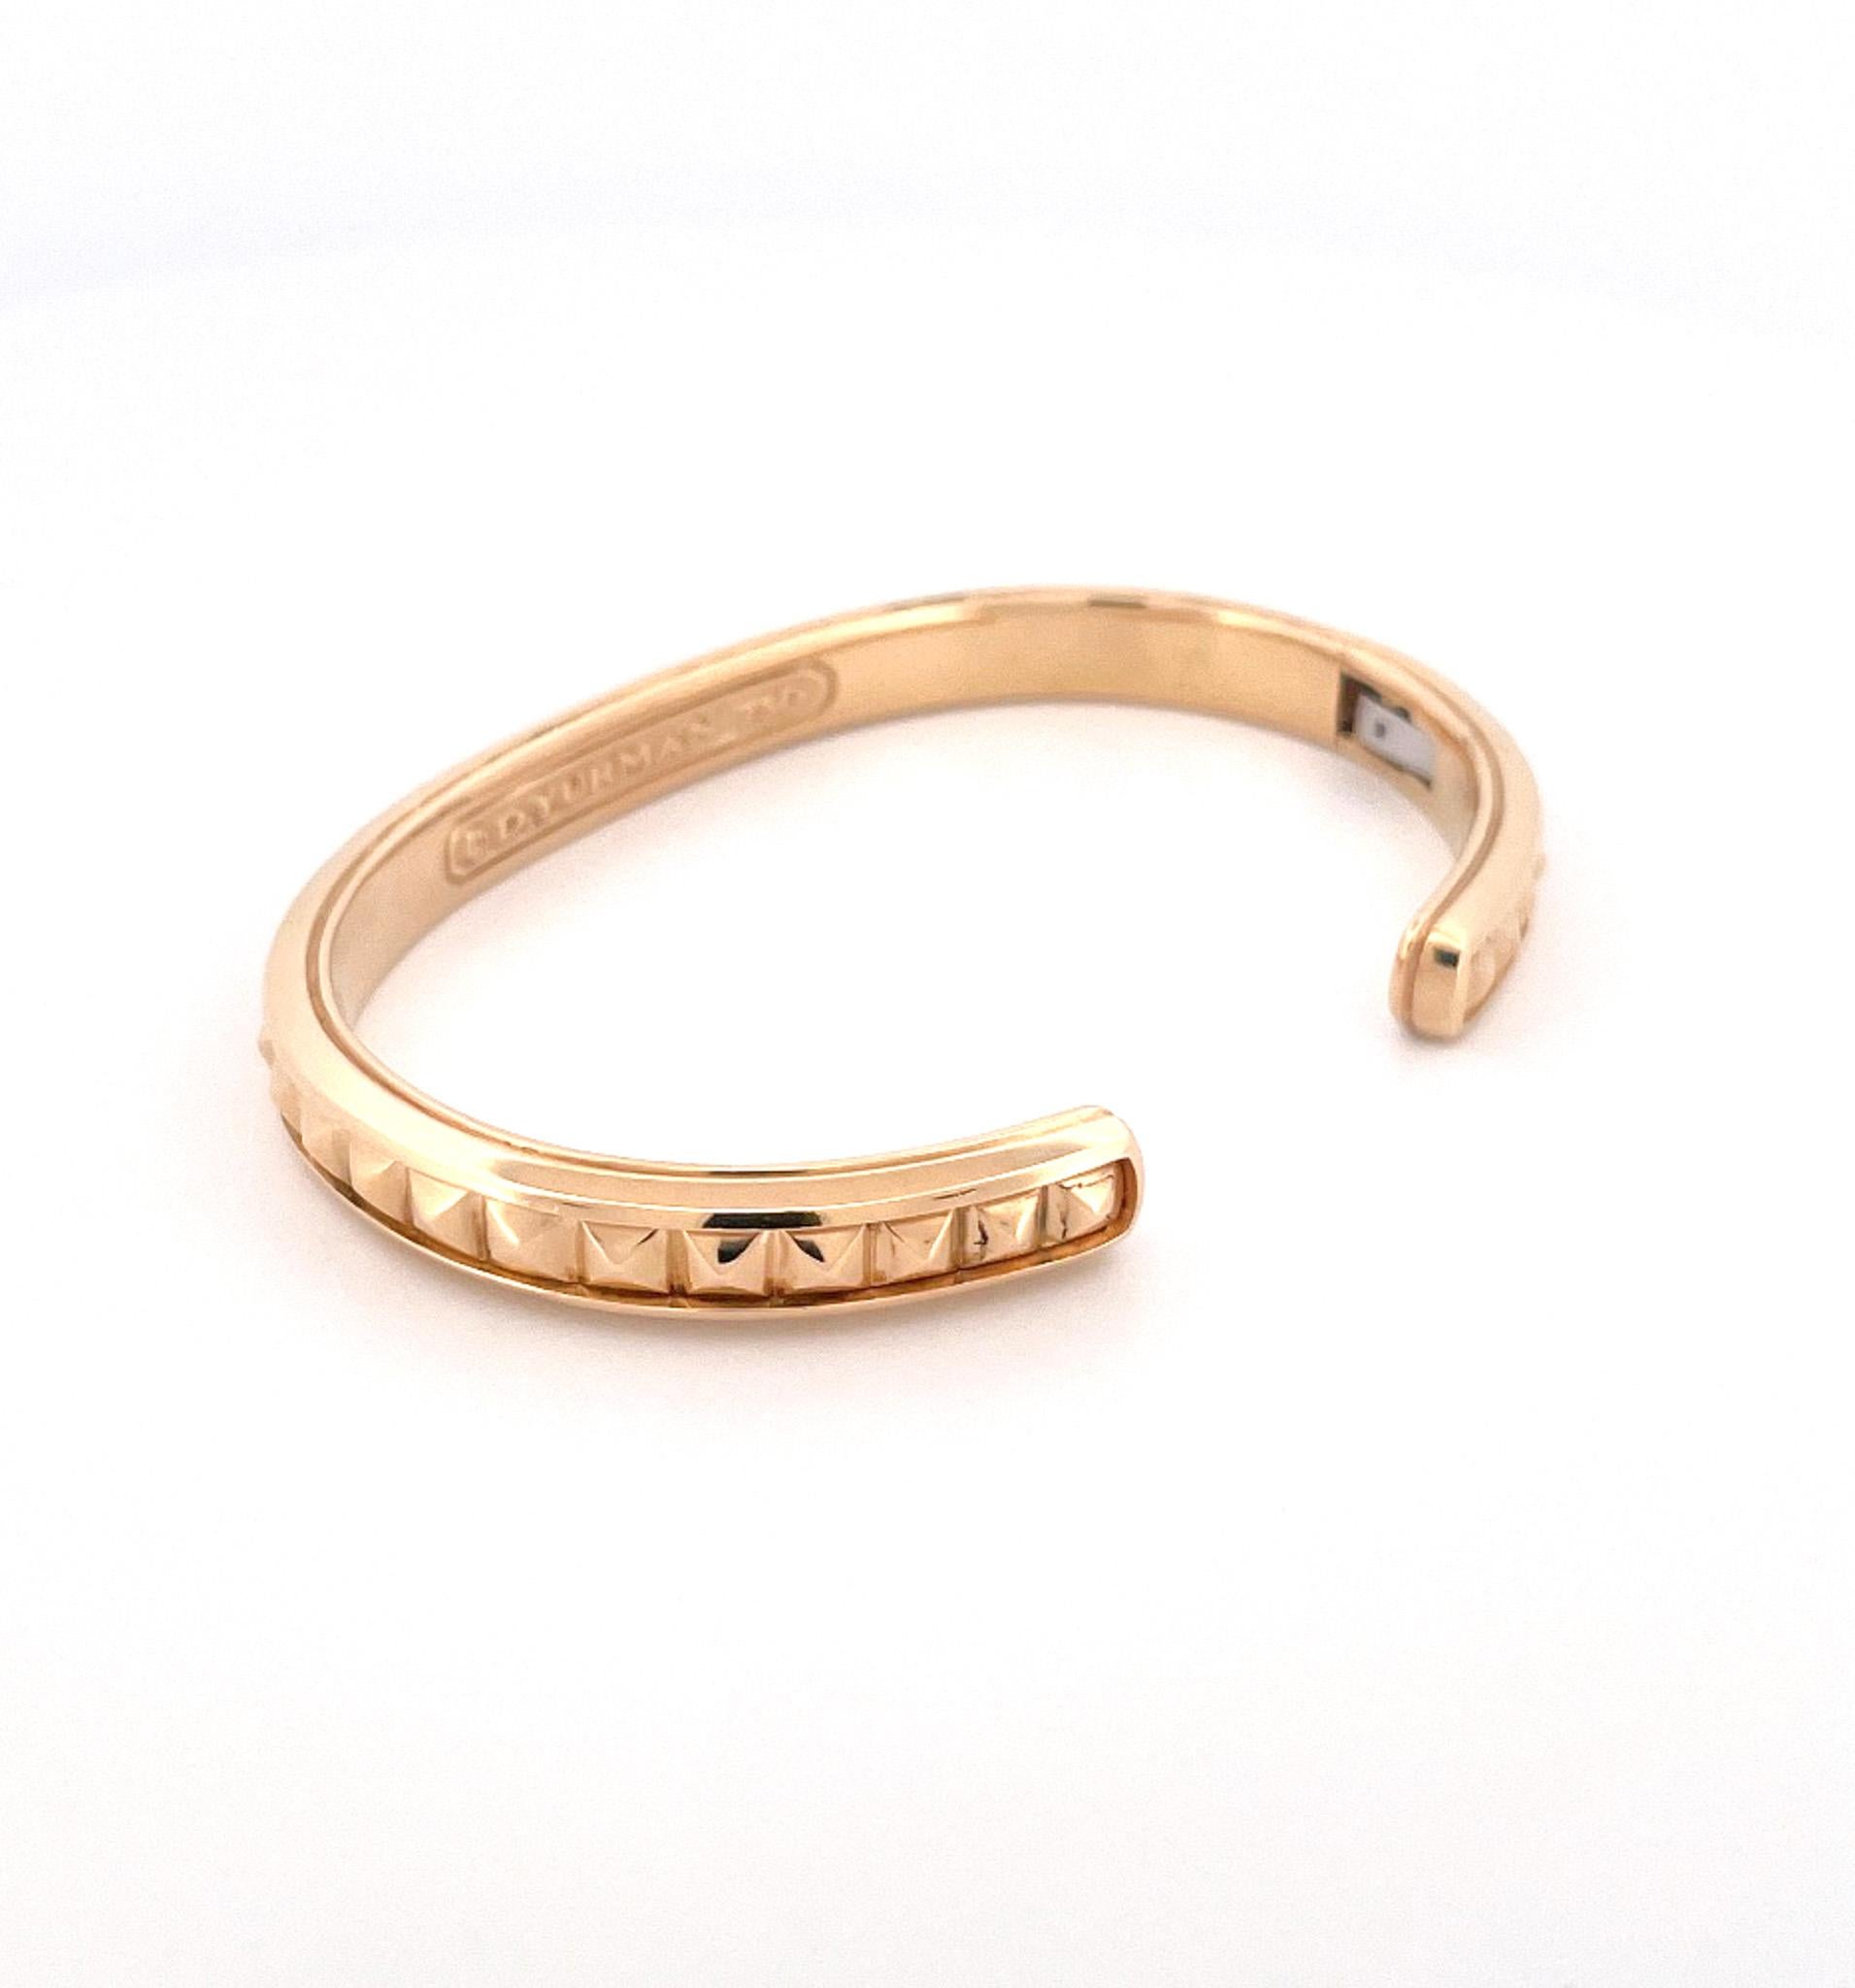 From designer David Yurman, circa 1990s, 18 karat yellow gold gentlemen's cuff bracelet. This bracelet is crafted with a ridged design along the center row. This bracelet is a men's small measuring 9 inches with a hinge side closure. This bracelet